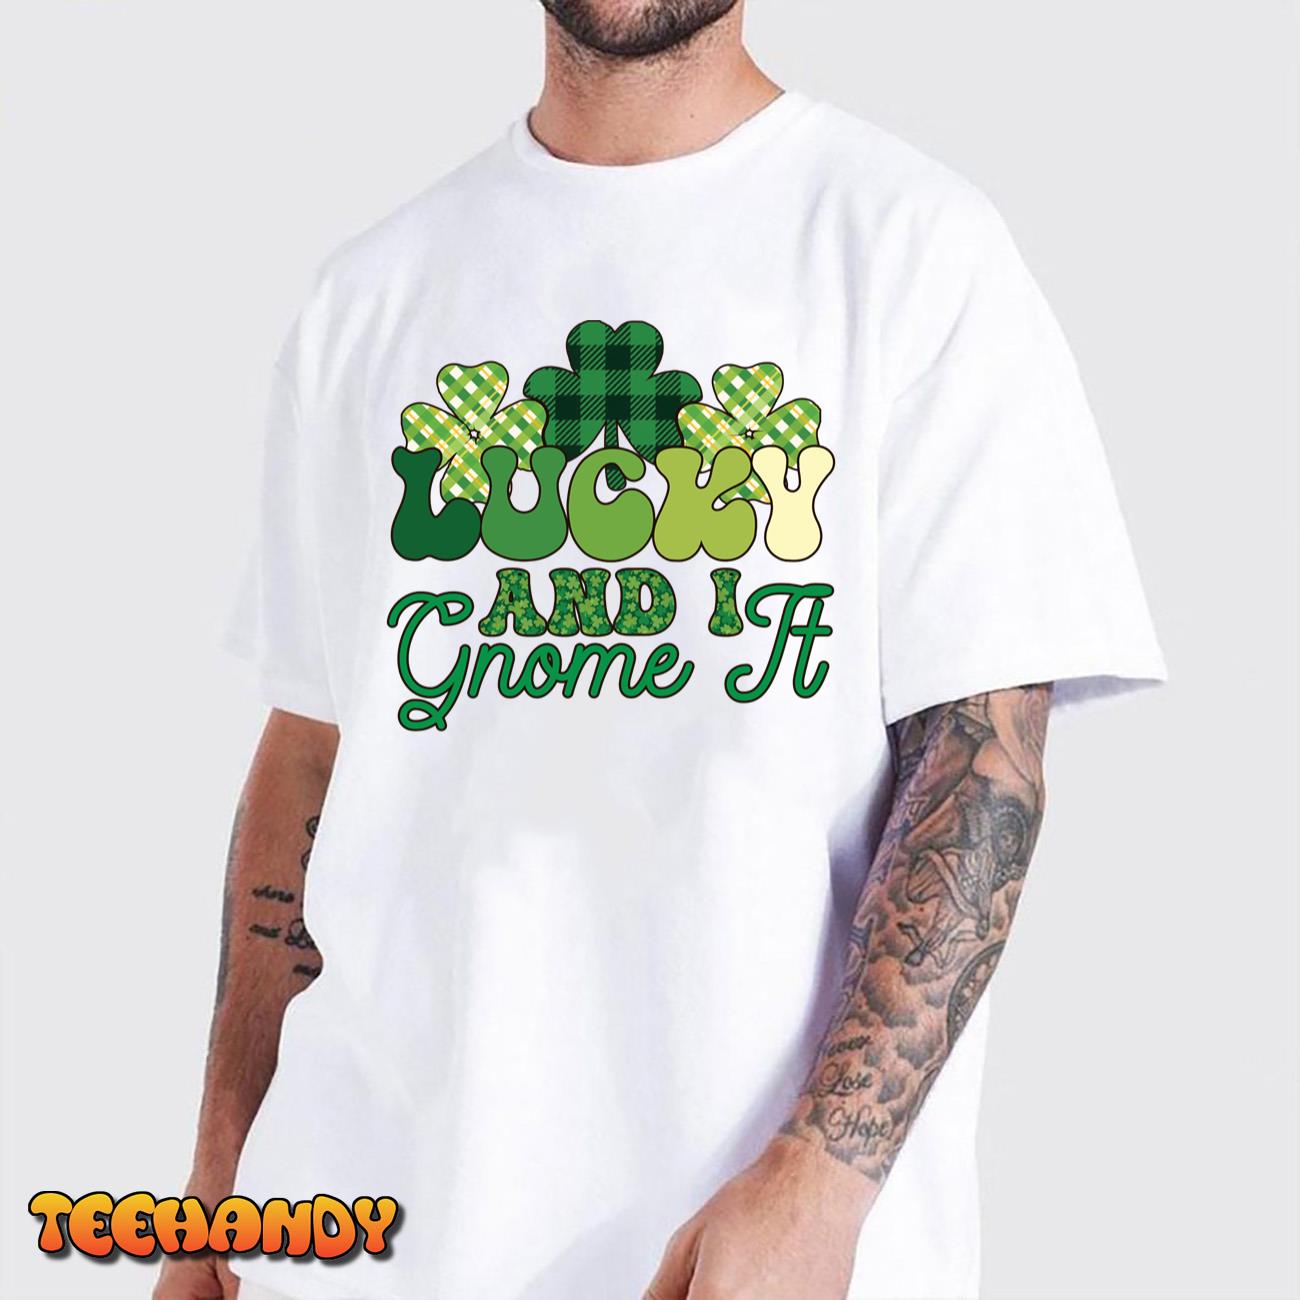 Lucky and I Gnome It T-Shirt